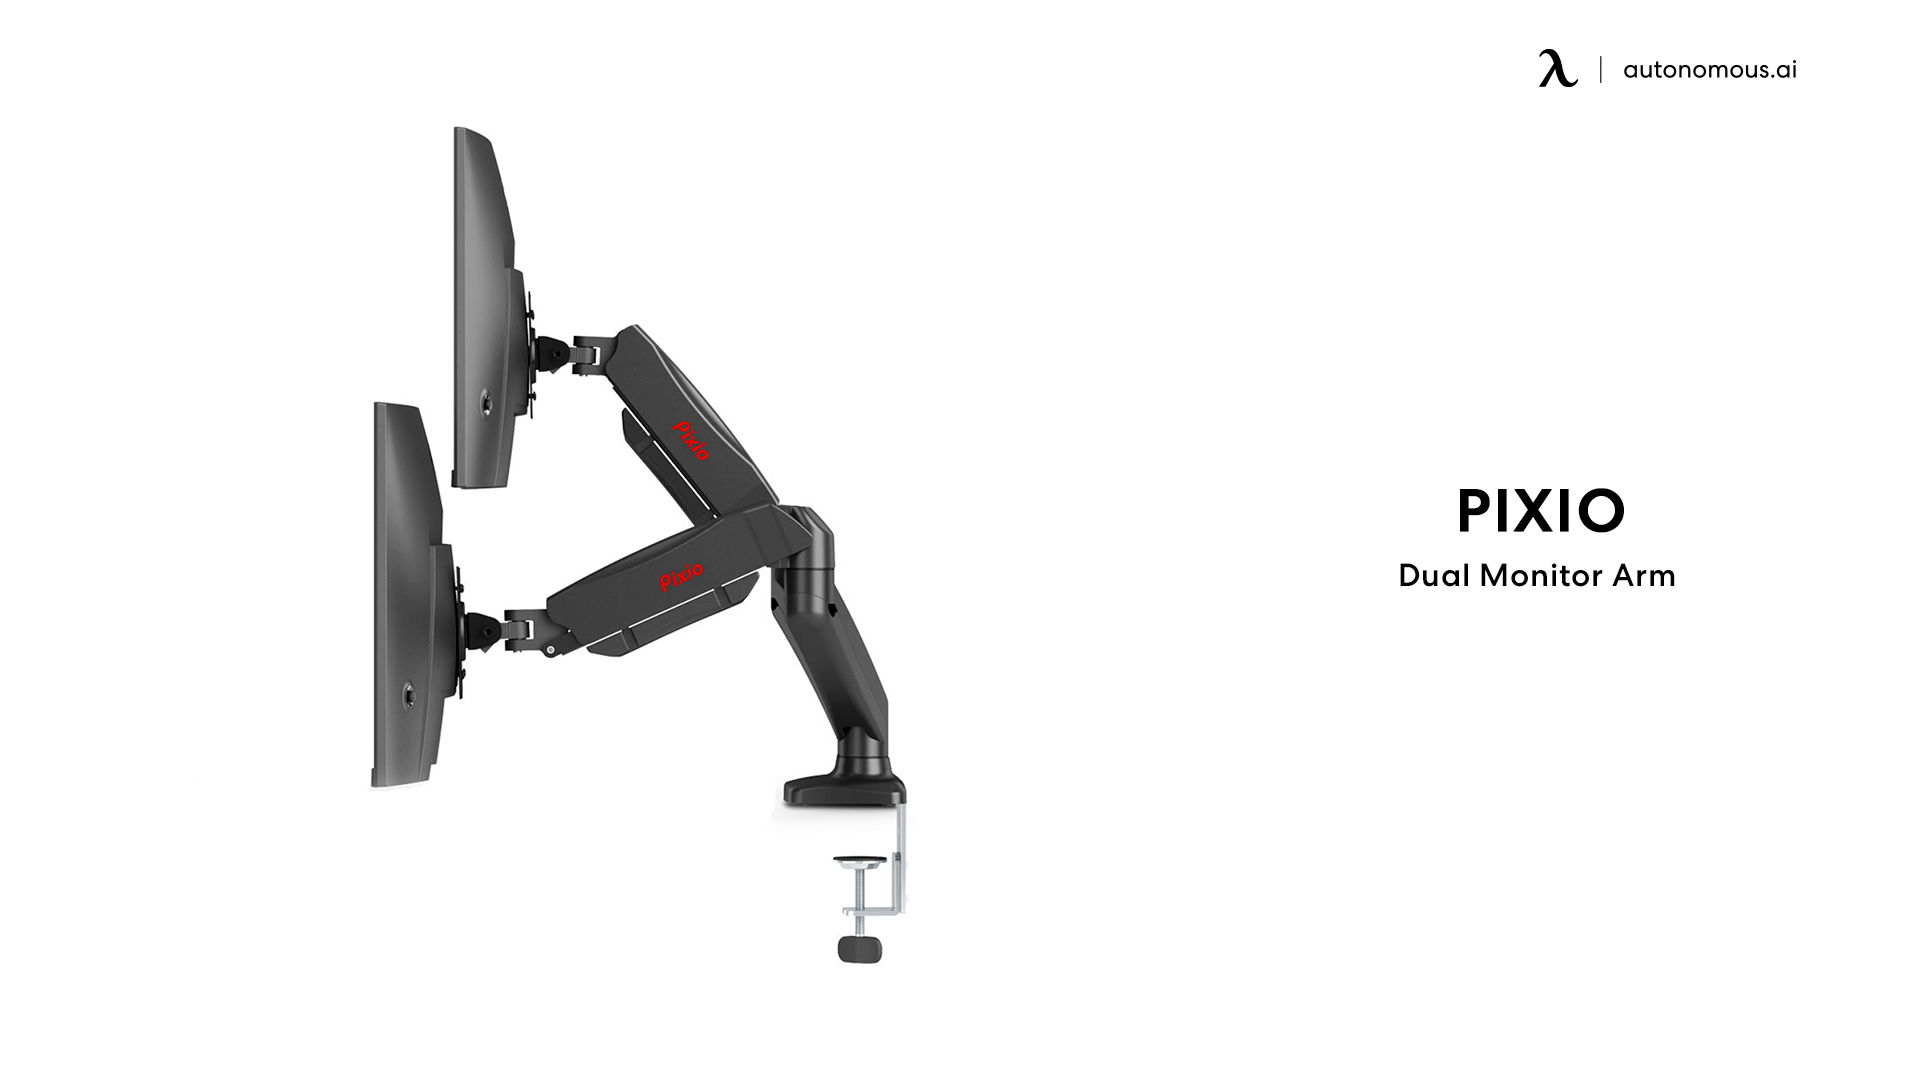 Dual Monitor Arm by Pixio for day trading computer setup